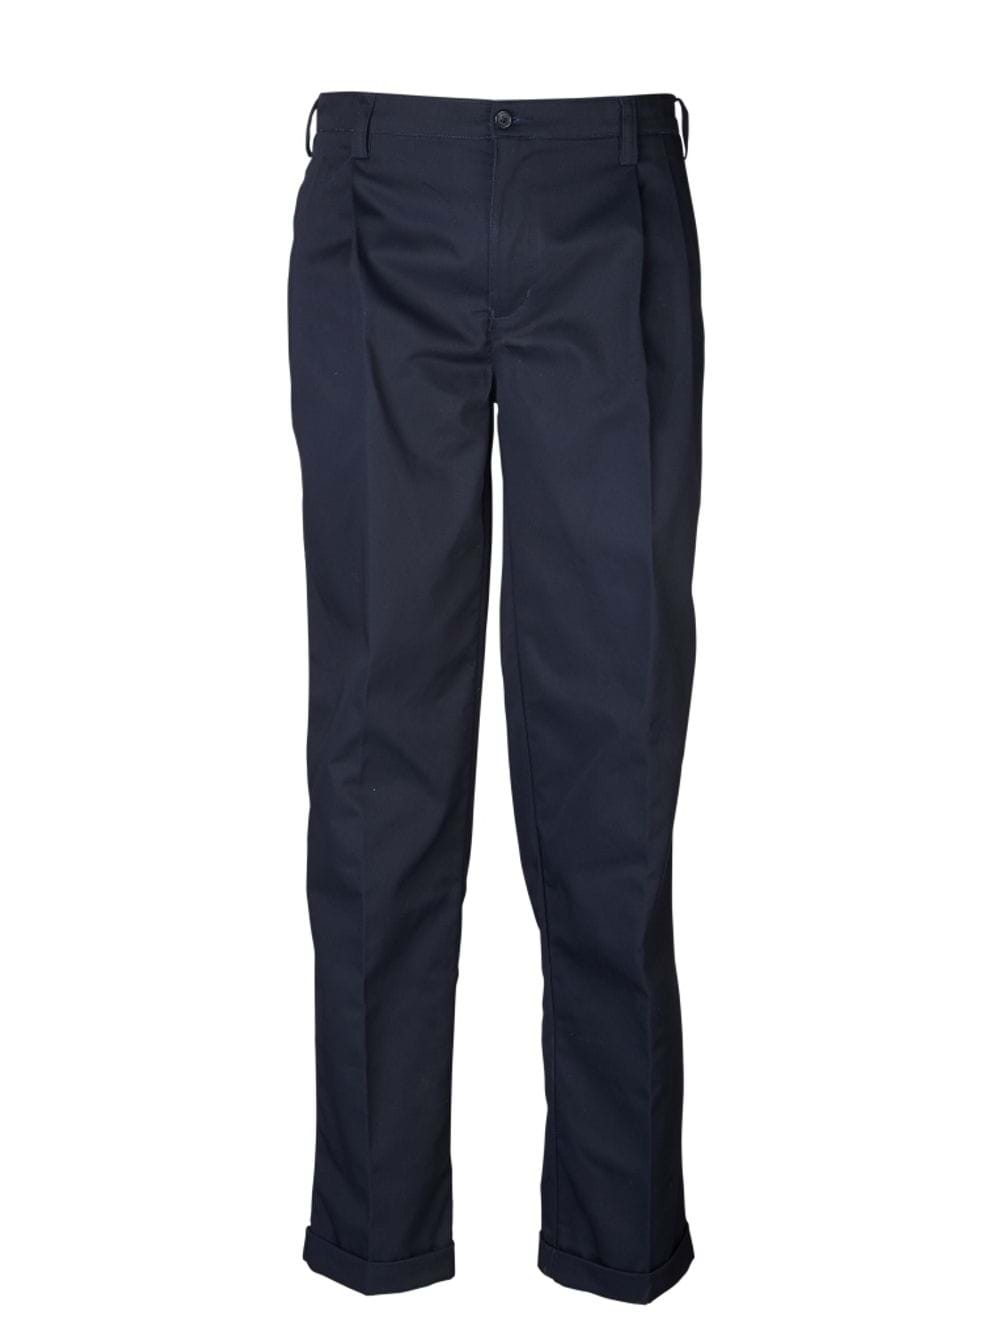 Eastwood Chino with Turnups - Navy / 44